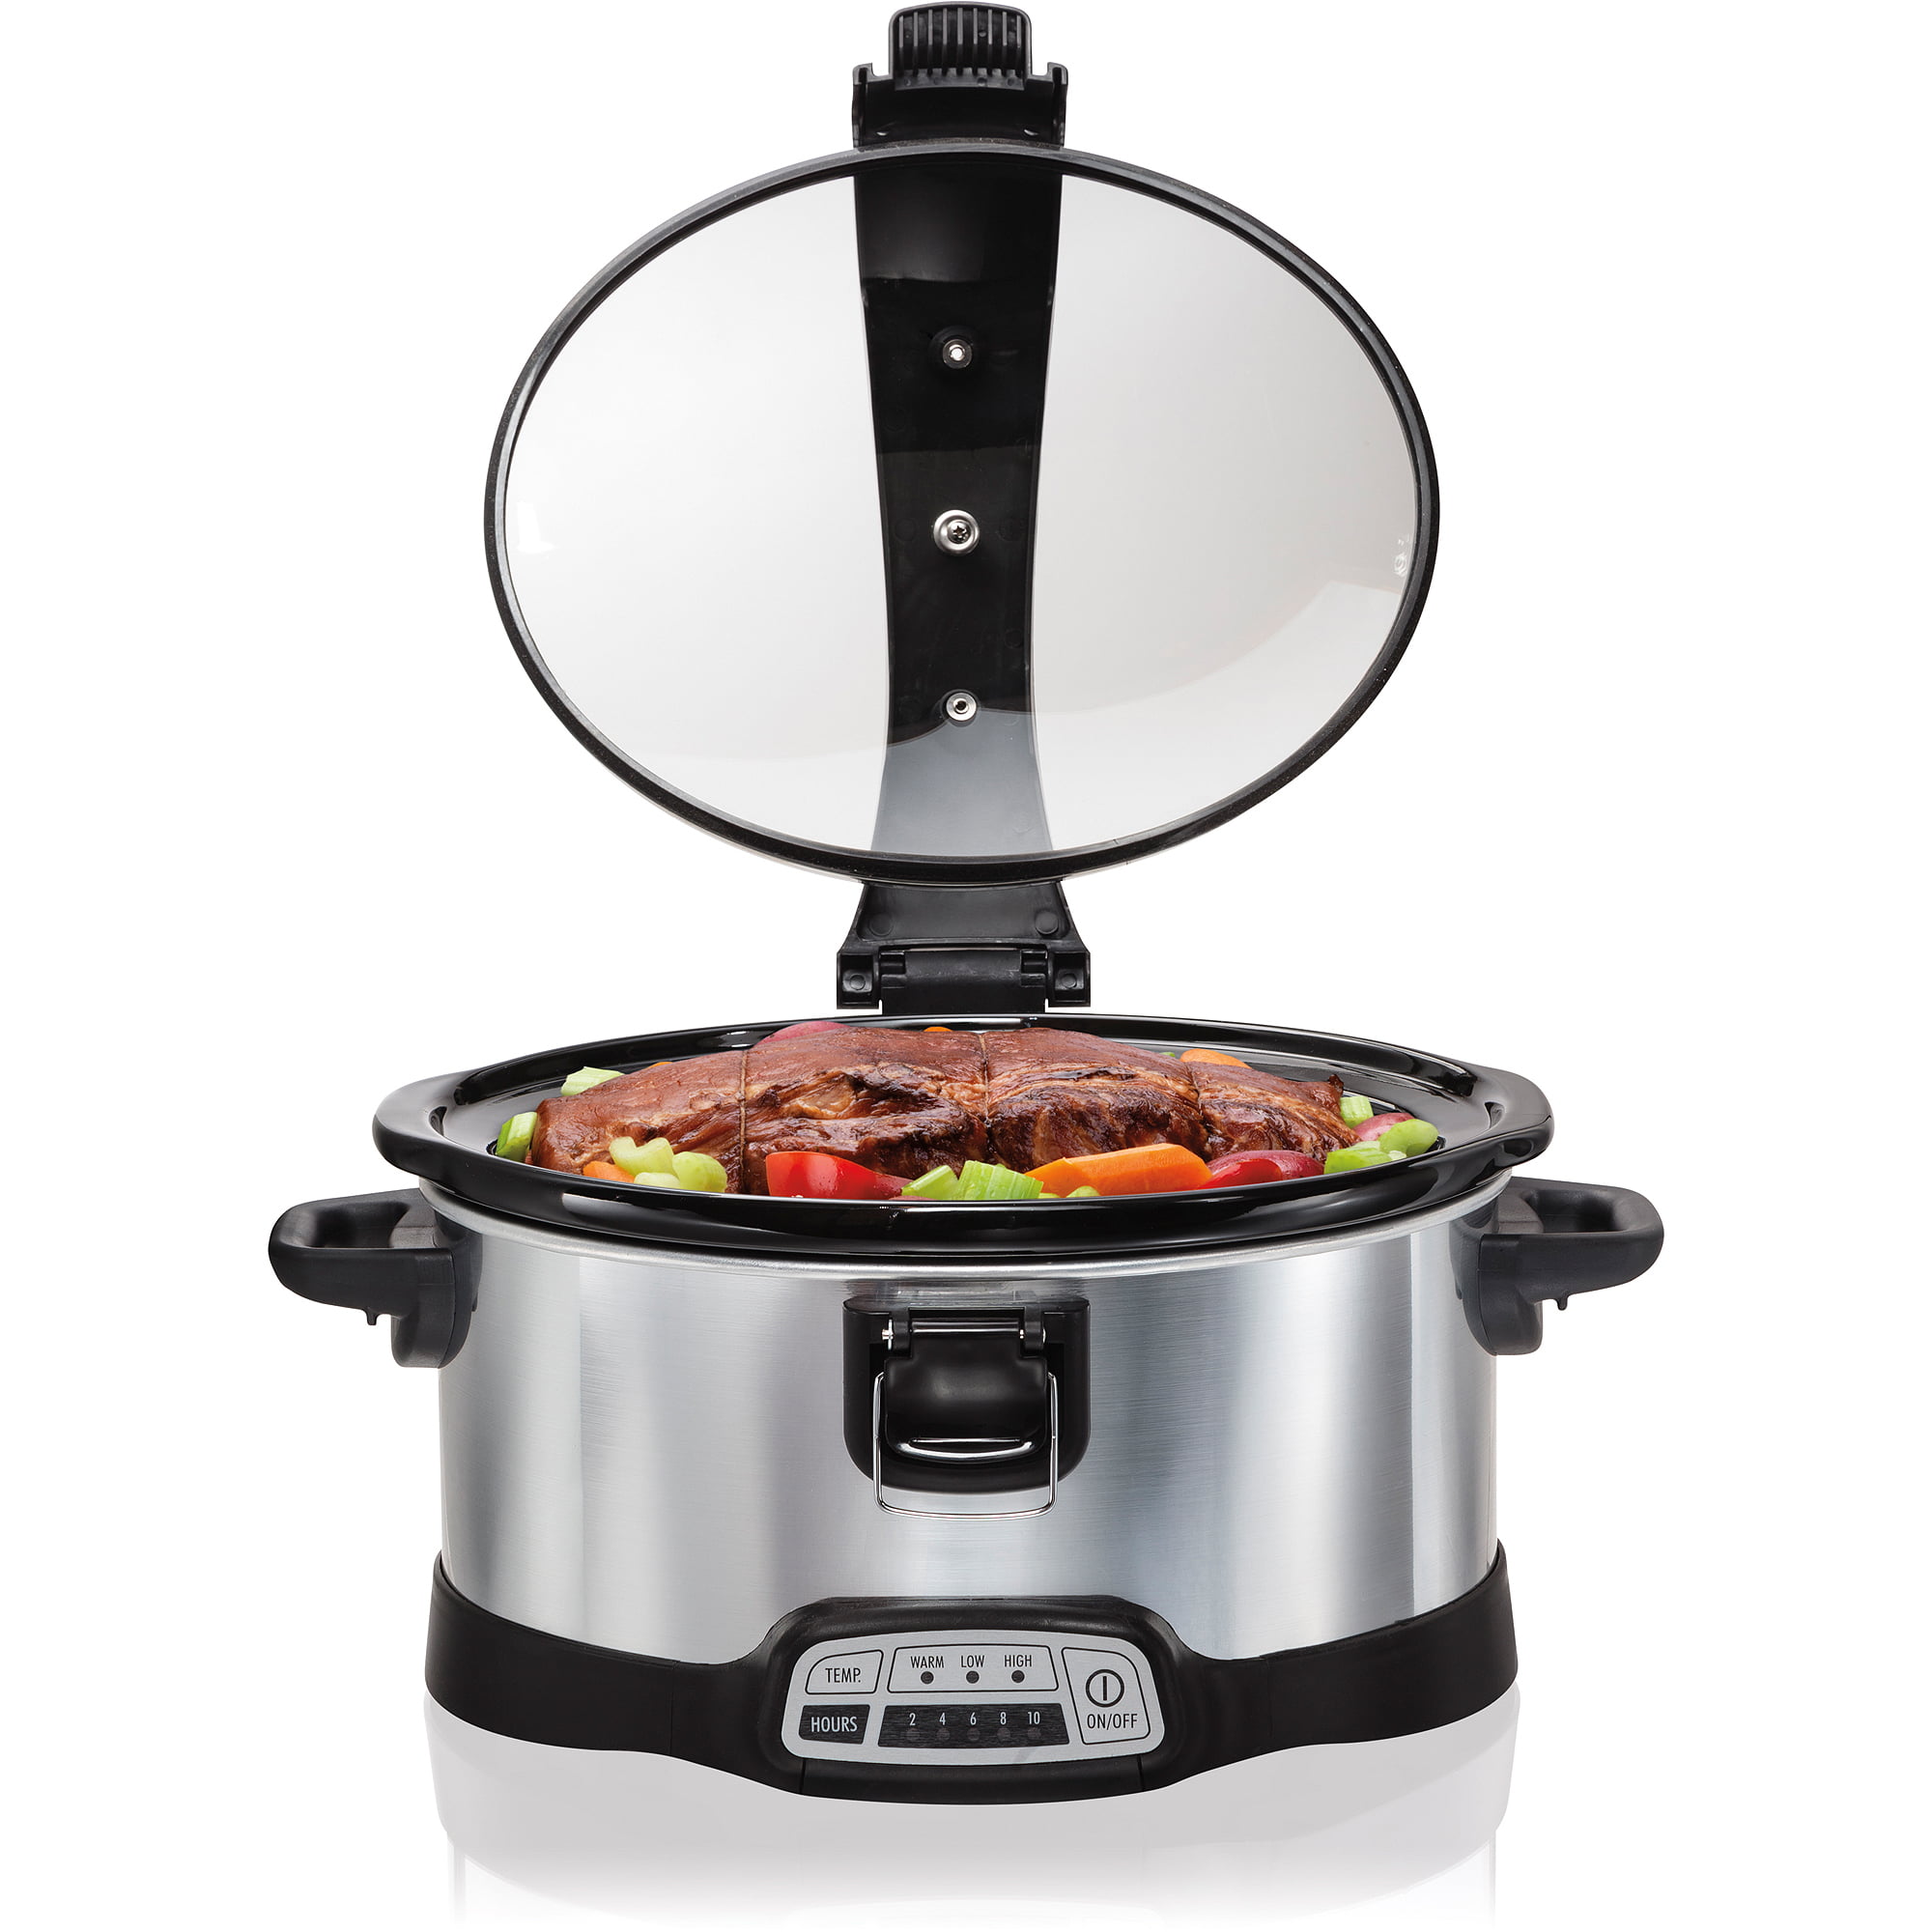 Stay or Go® 6 Quart Slow Cooker (33264)